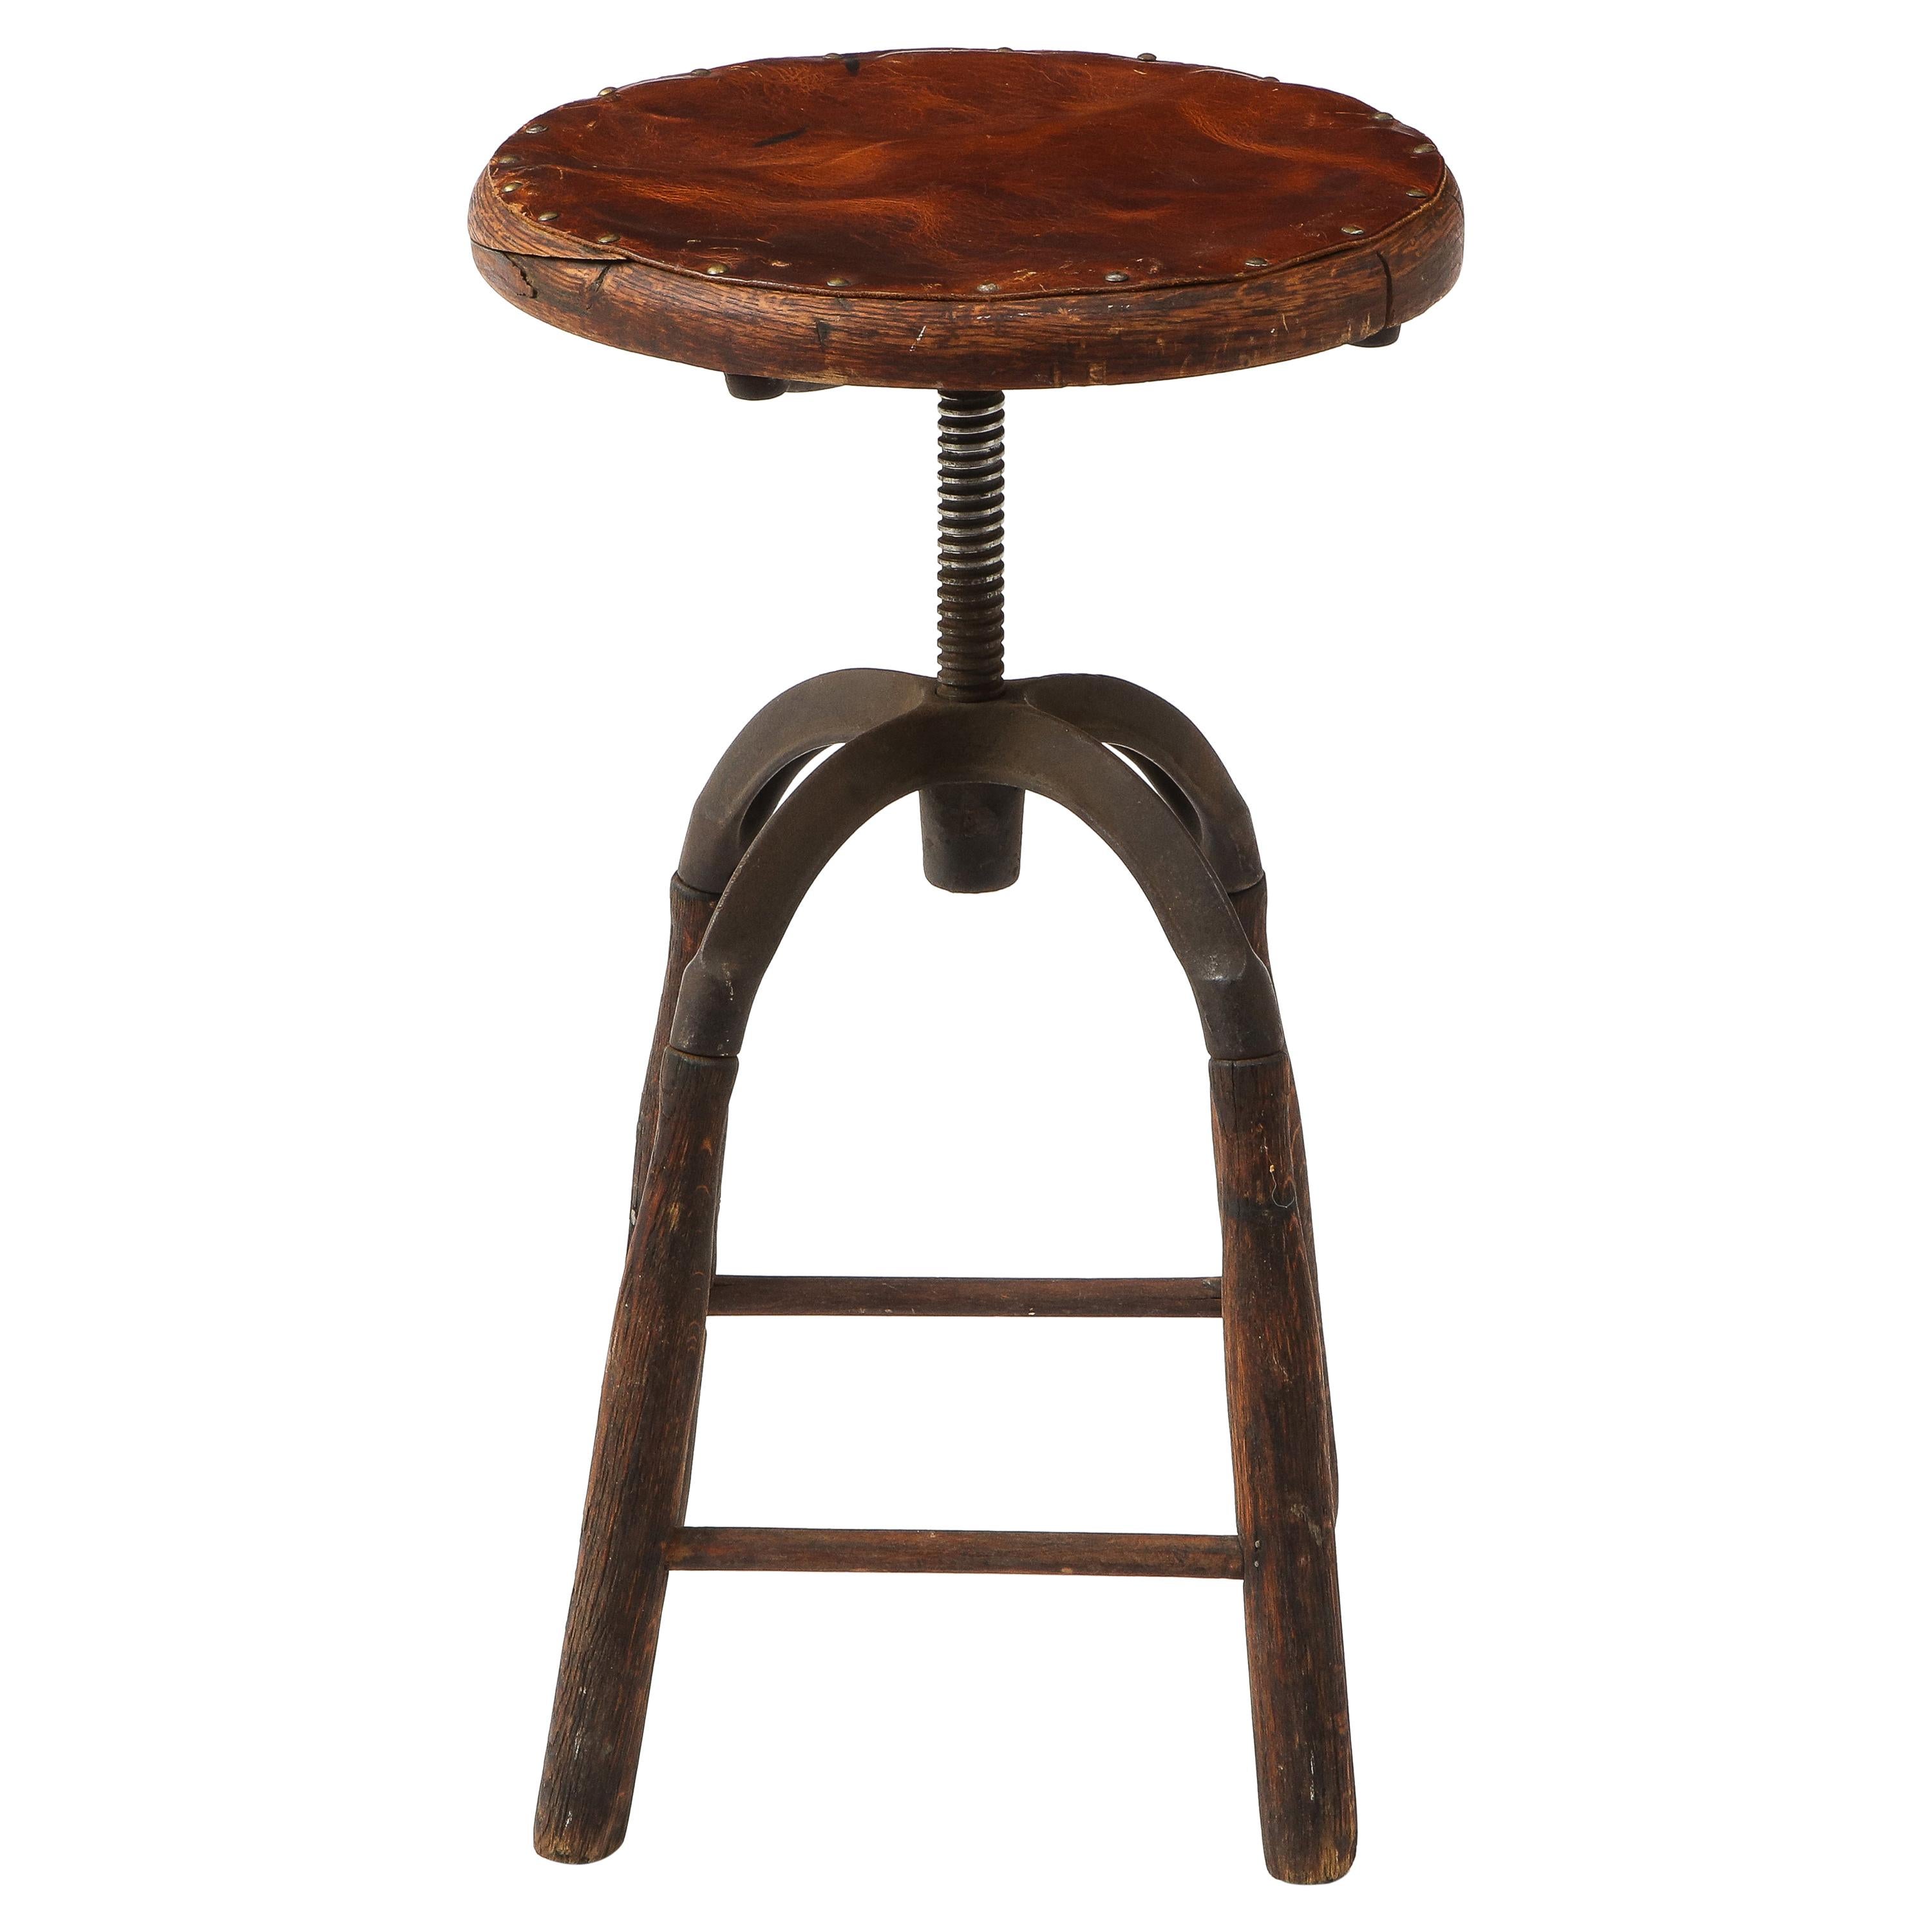 Early Industrial Work Stool, USA, 1940's